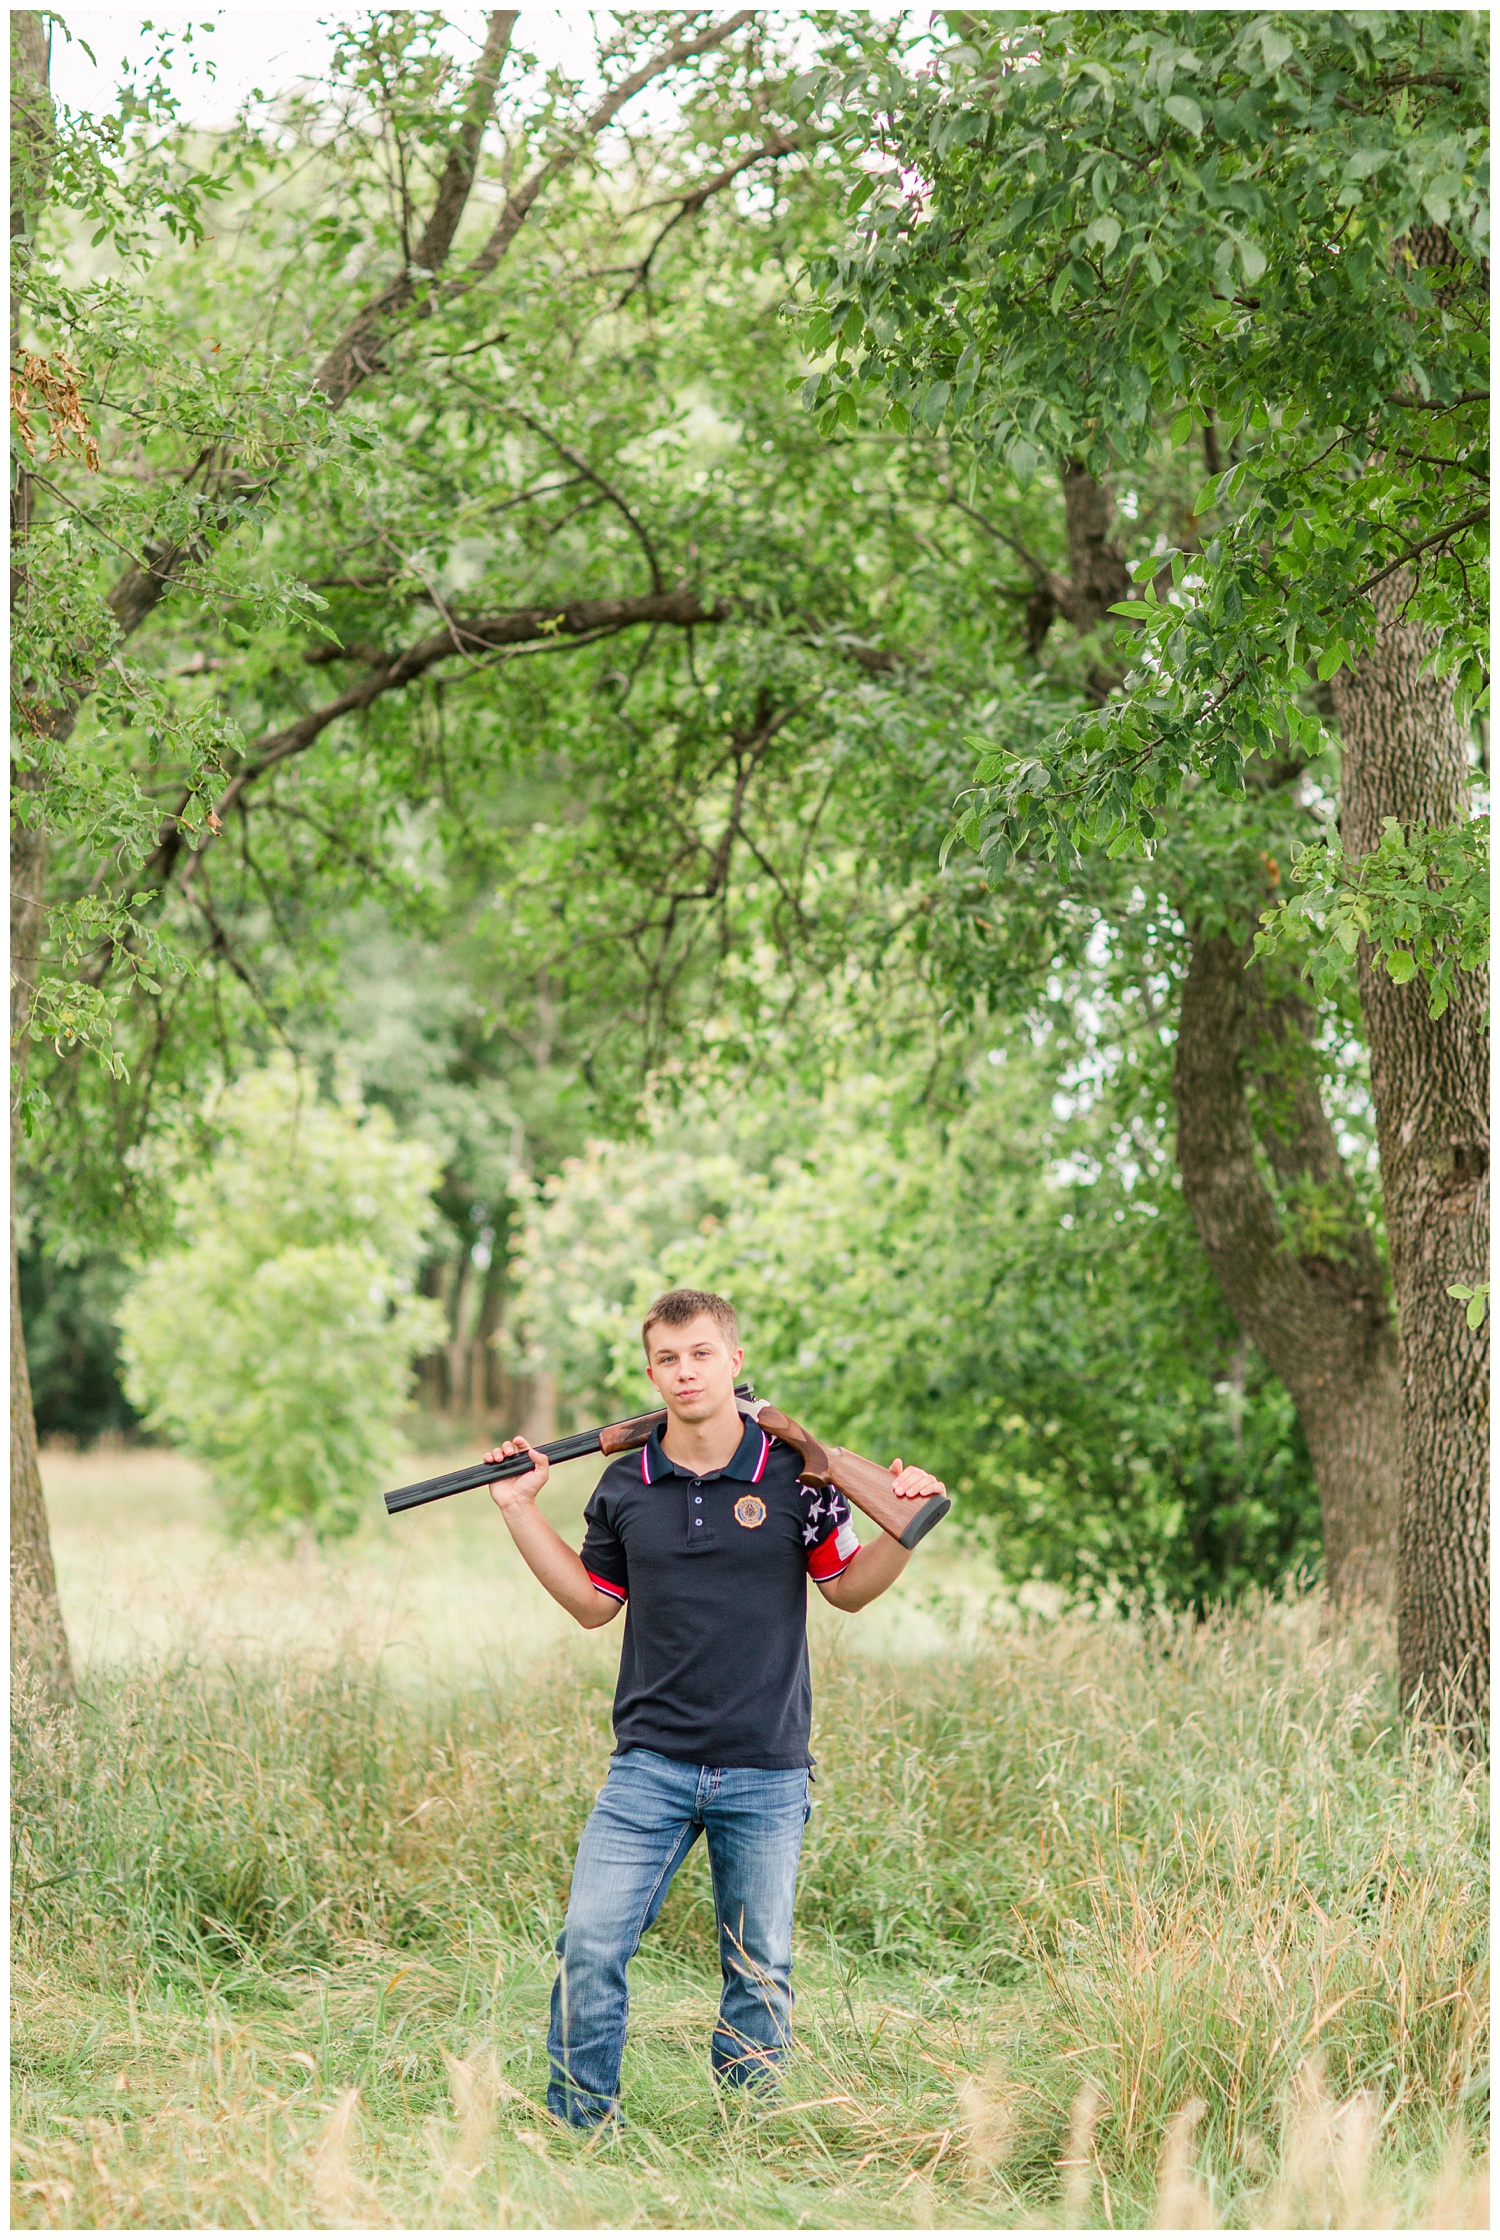 Senior boy wearing trapshooting gear carrying a shotgun around his neck in a grassy field surrounded by trees a on rural Iowa farm | CB Studio